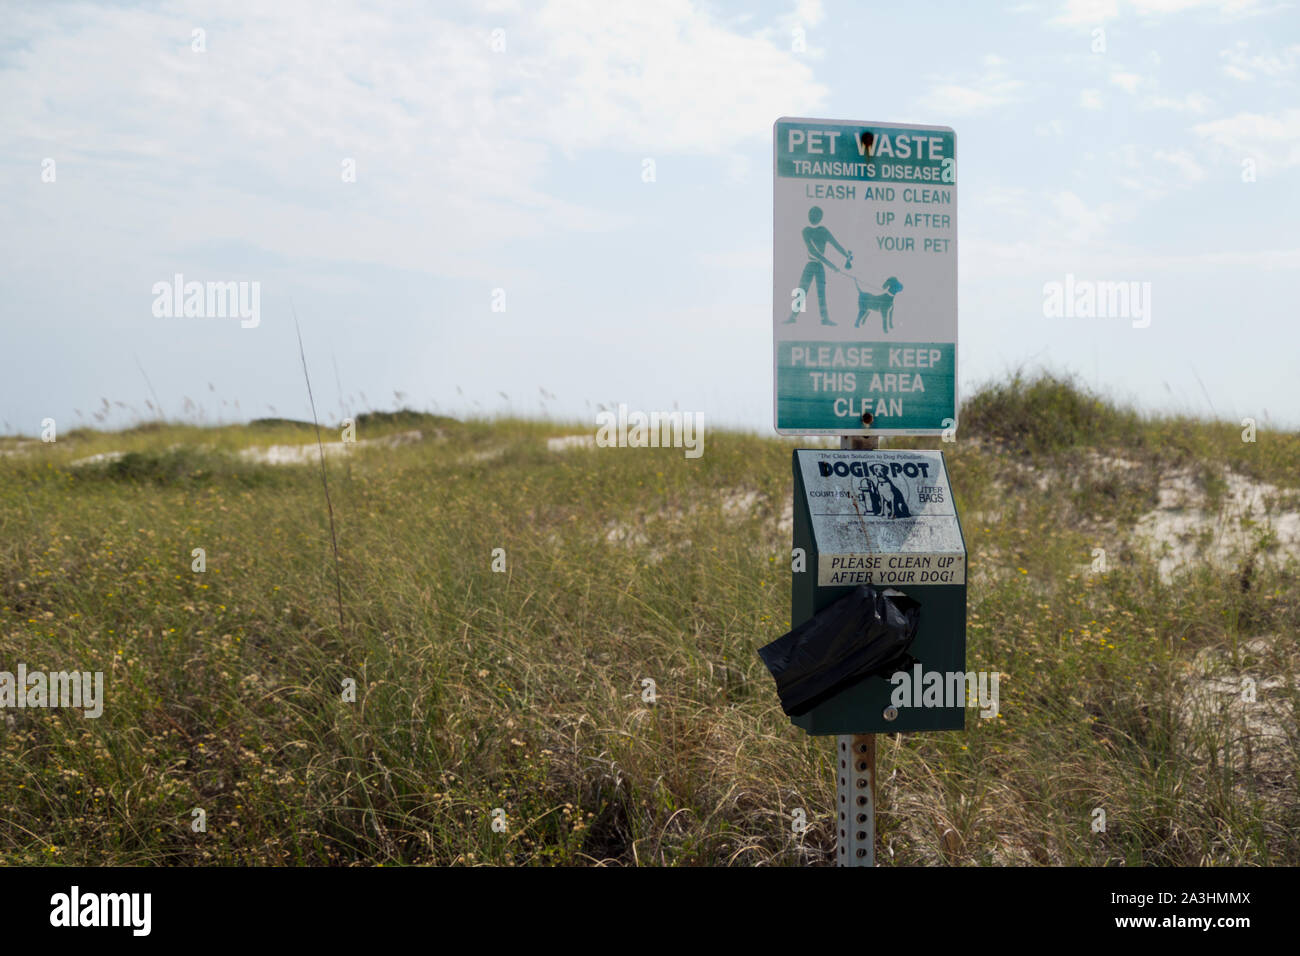 Plastic bag dispenser and sign reminding pet owner to clean up after their animals at the Rosamond Johnson, Jr. National Park near Pensacola, Florida, Stock Photo